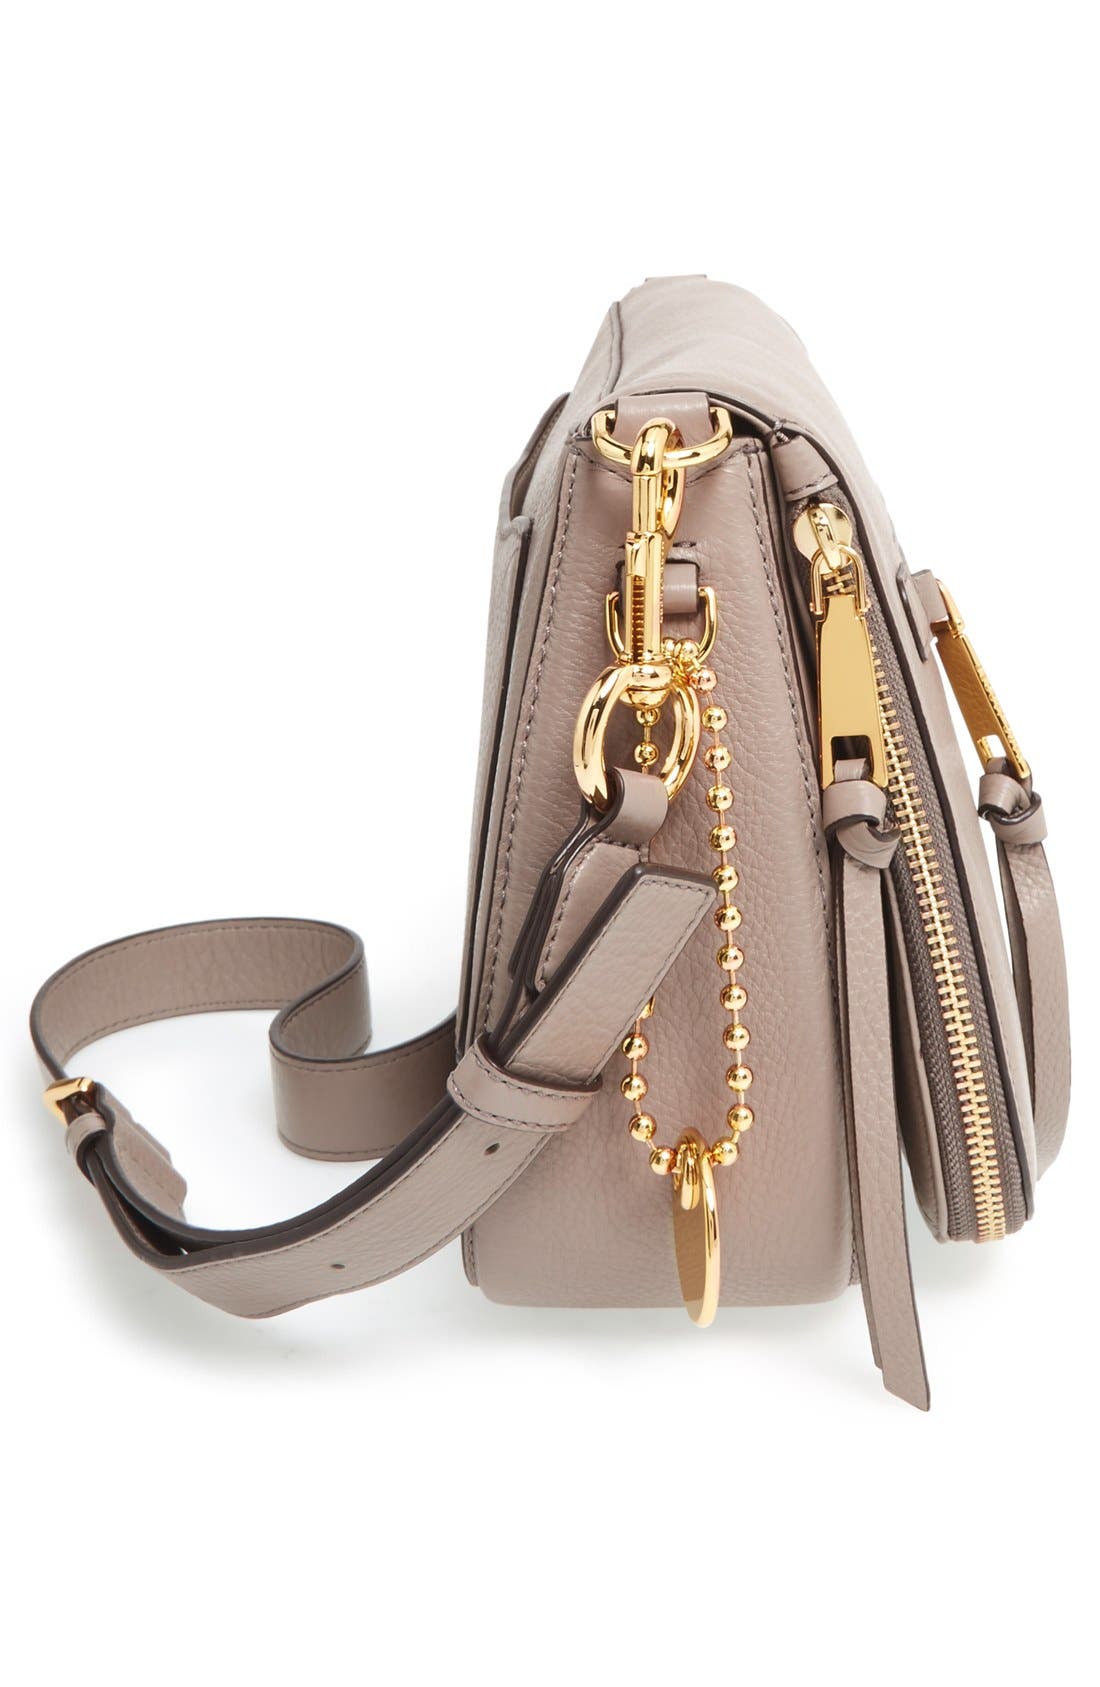 MARC JACOBS Small Recruit Nomad Pebbled Leather Crossbody Bag - Beige ...